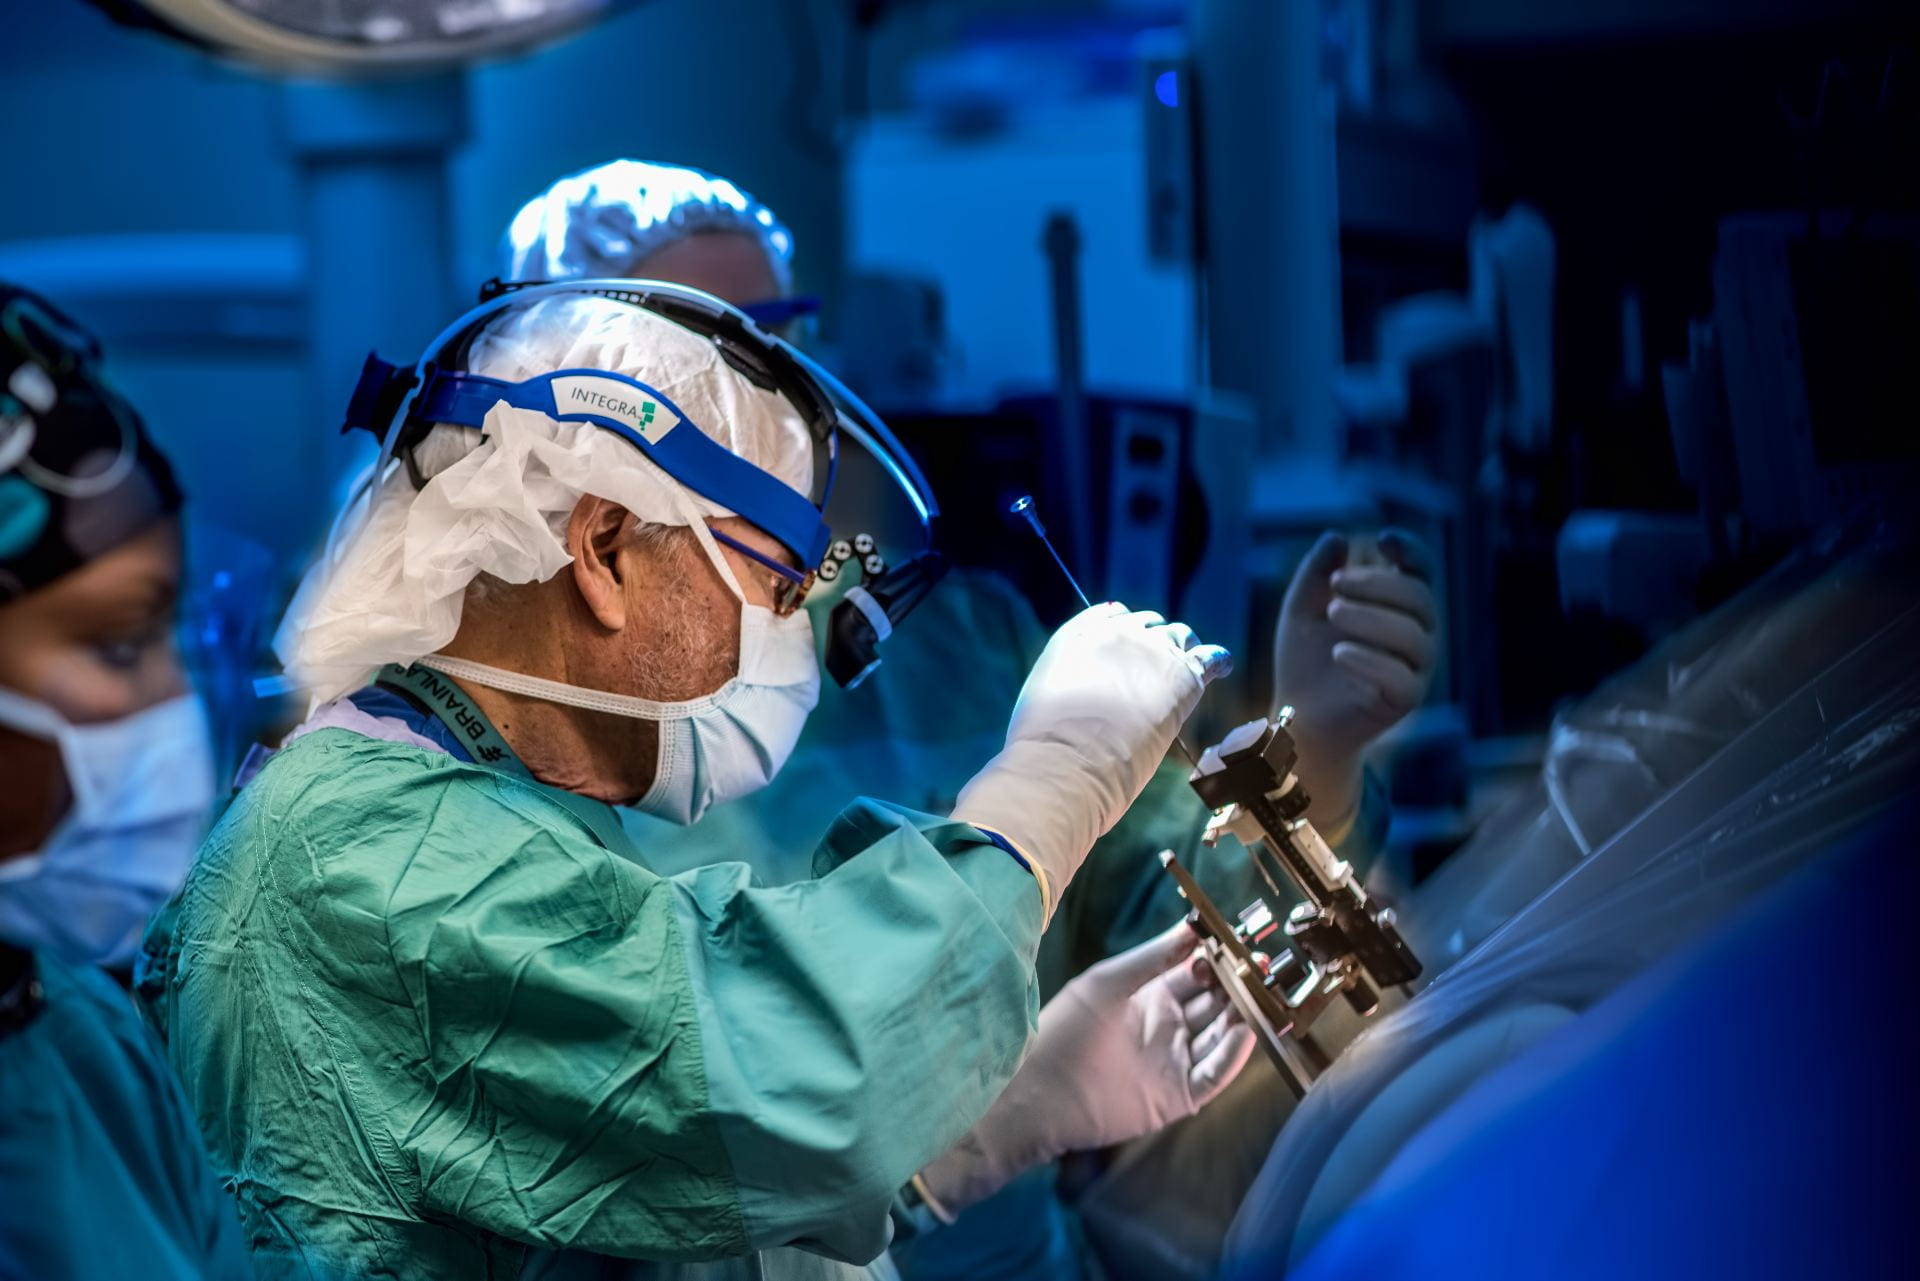 Neurosurgery performing a procedure on a patient